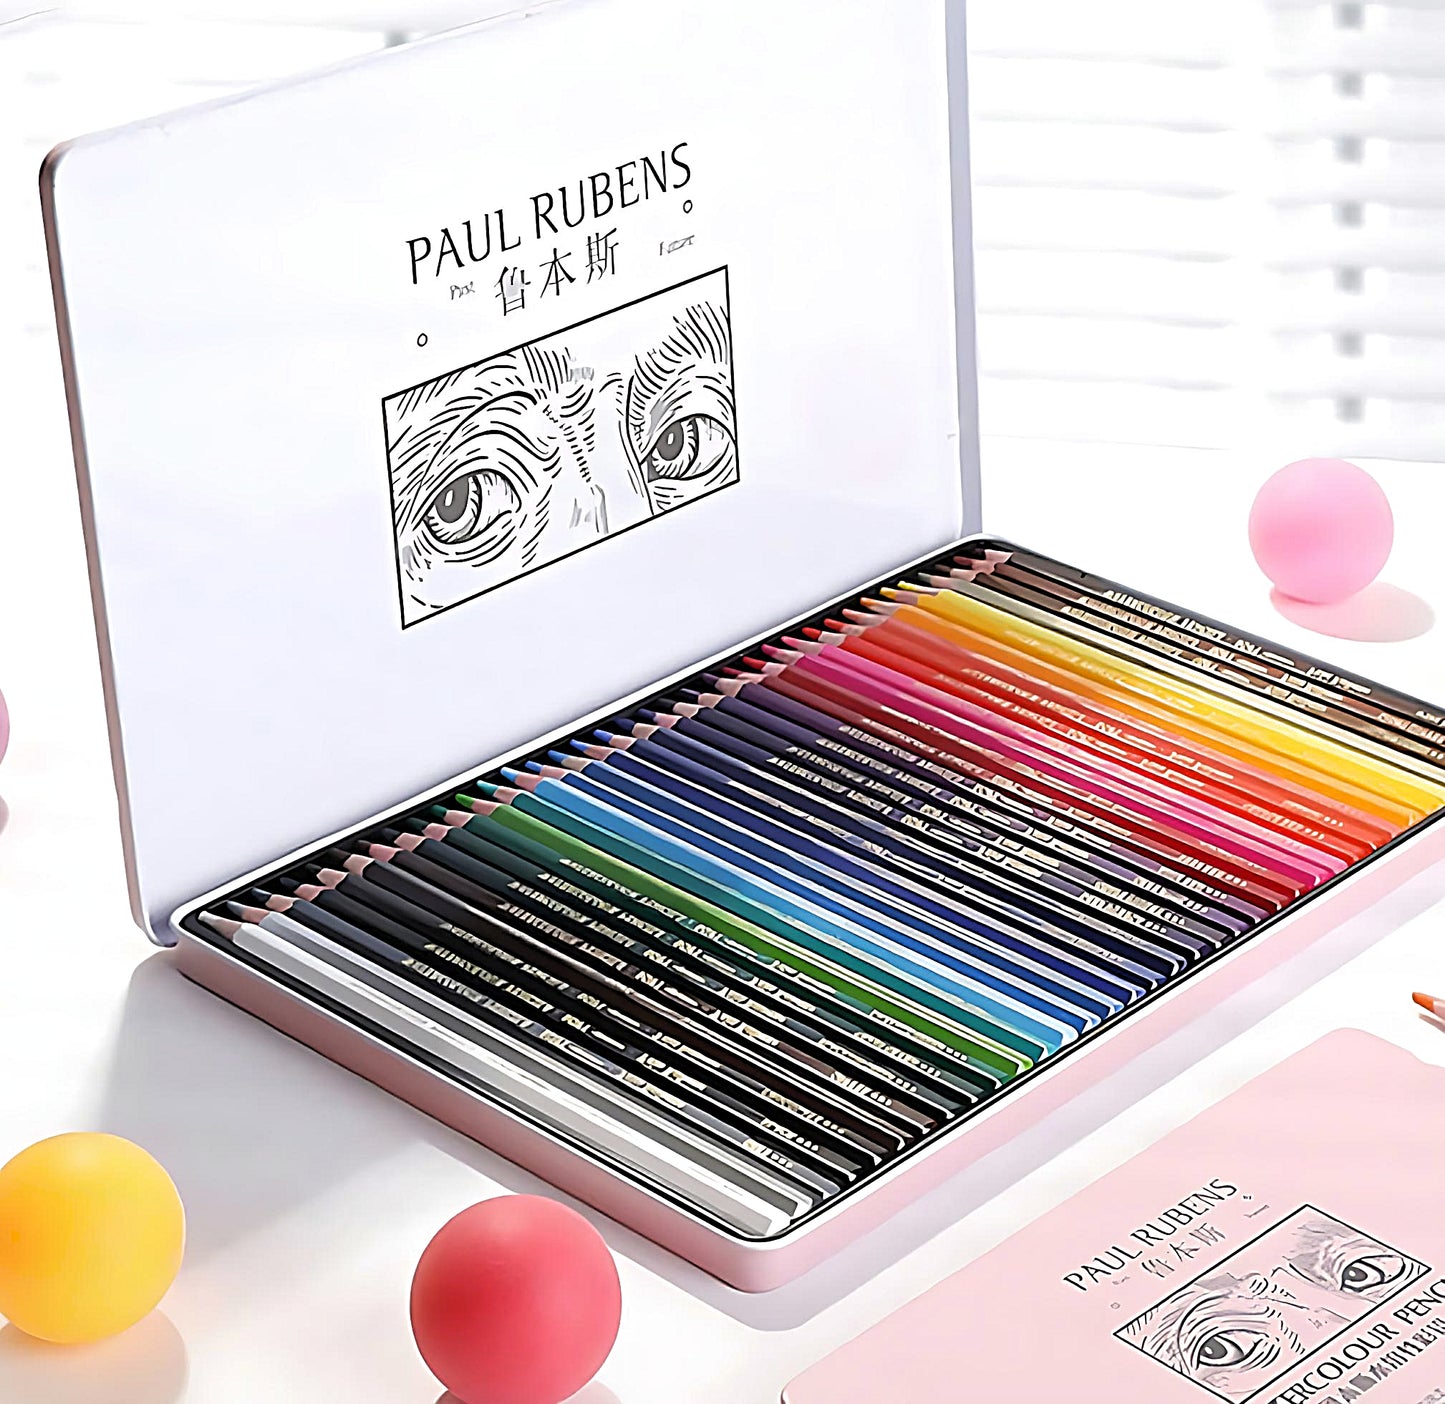 a set of Paul Rubens watercolor pencils in a pink tin box